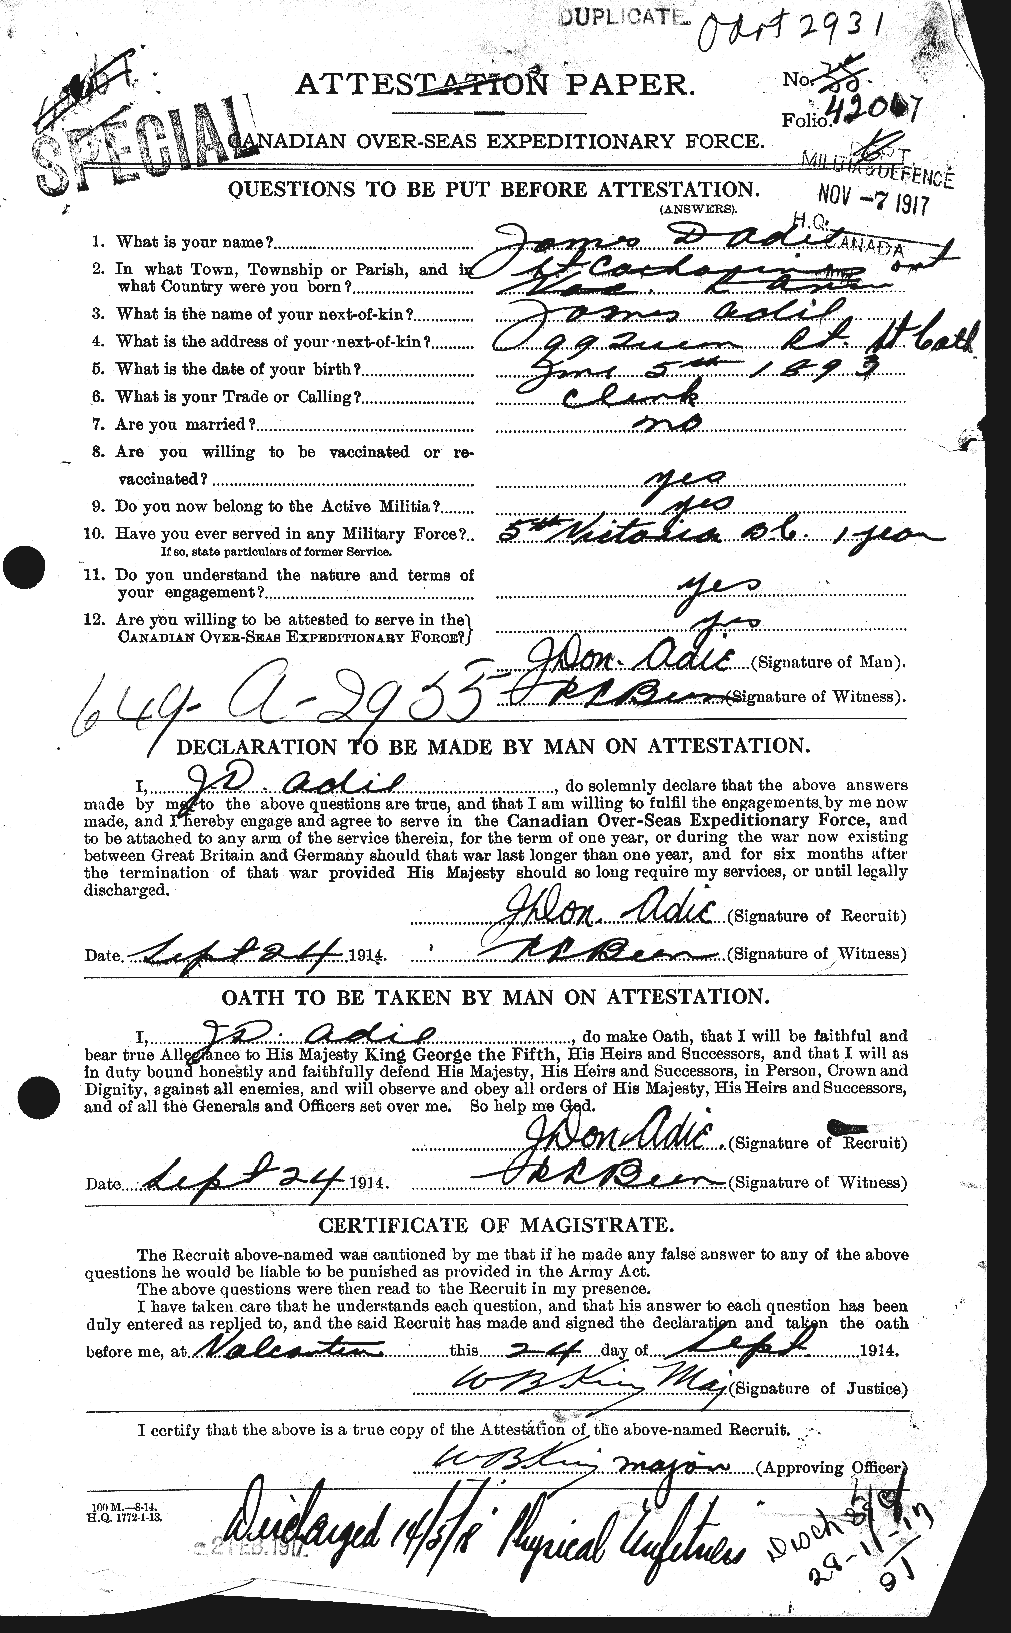 Personnel Records of the First World War - CEF 202818a